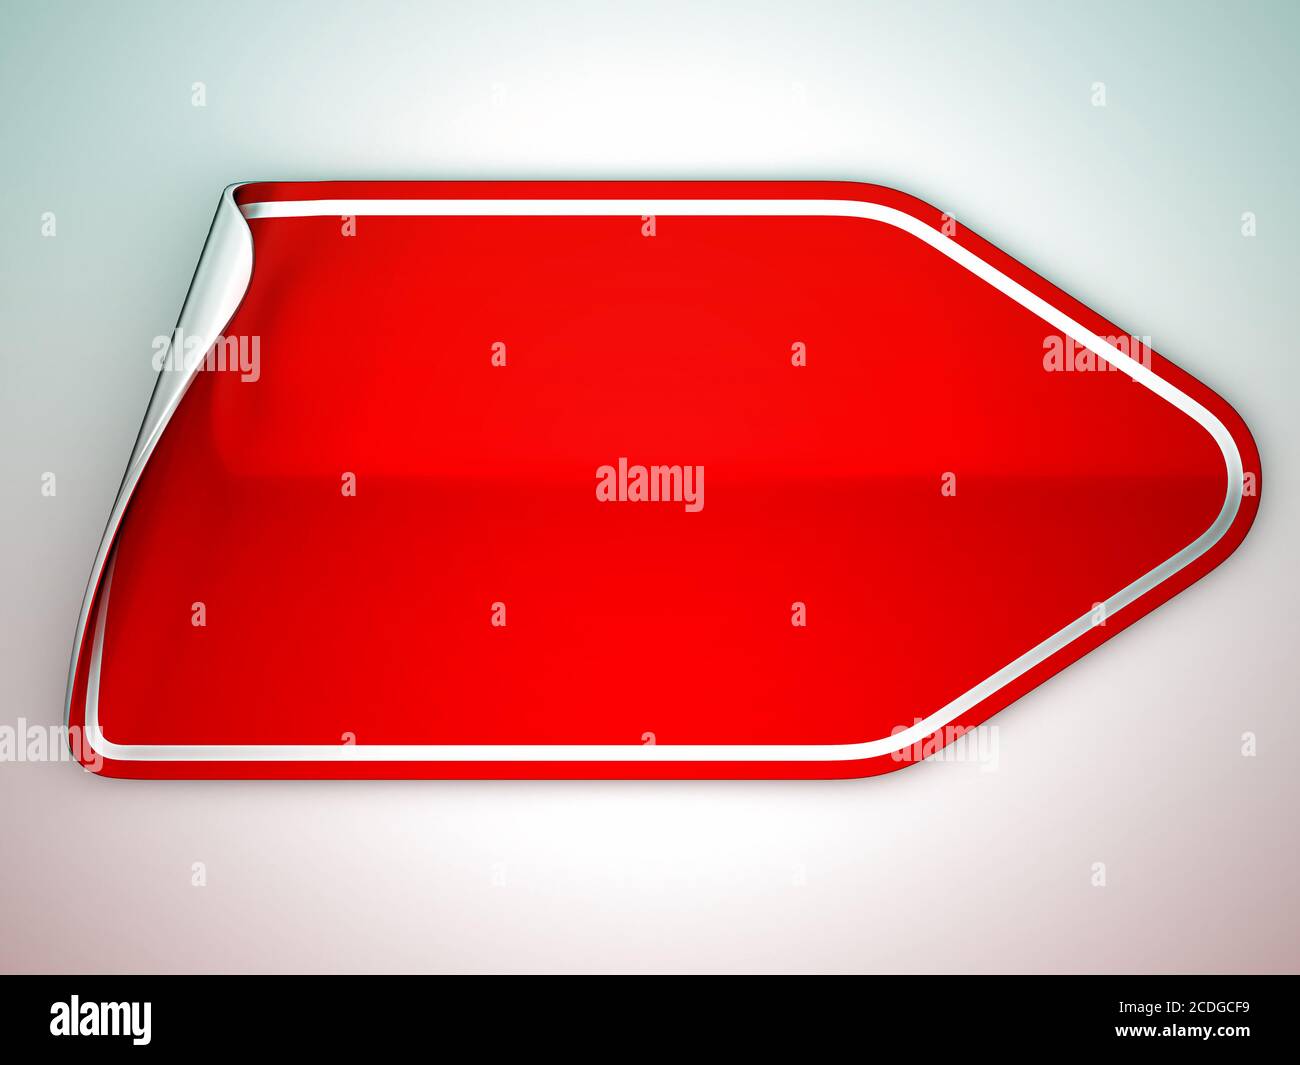 Red unstick bent sticker or label Stock Photo